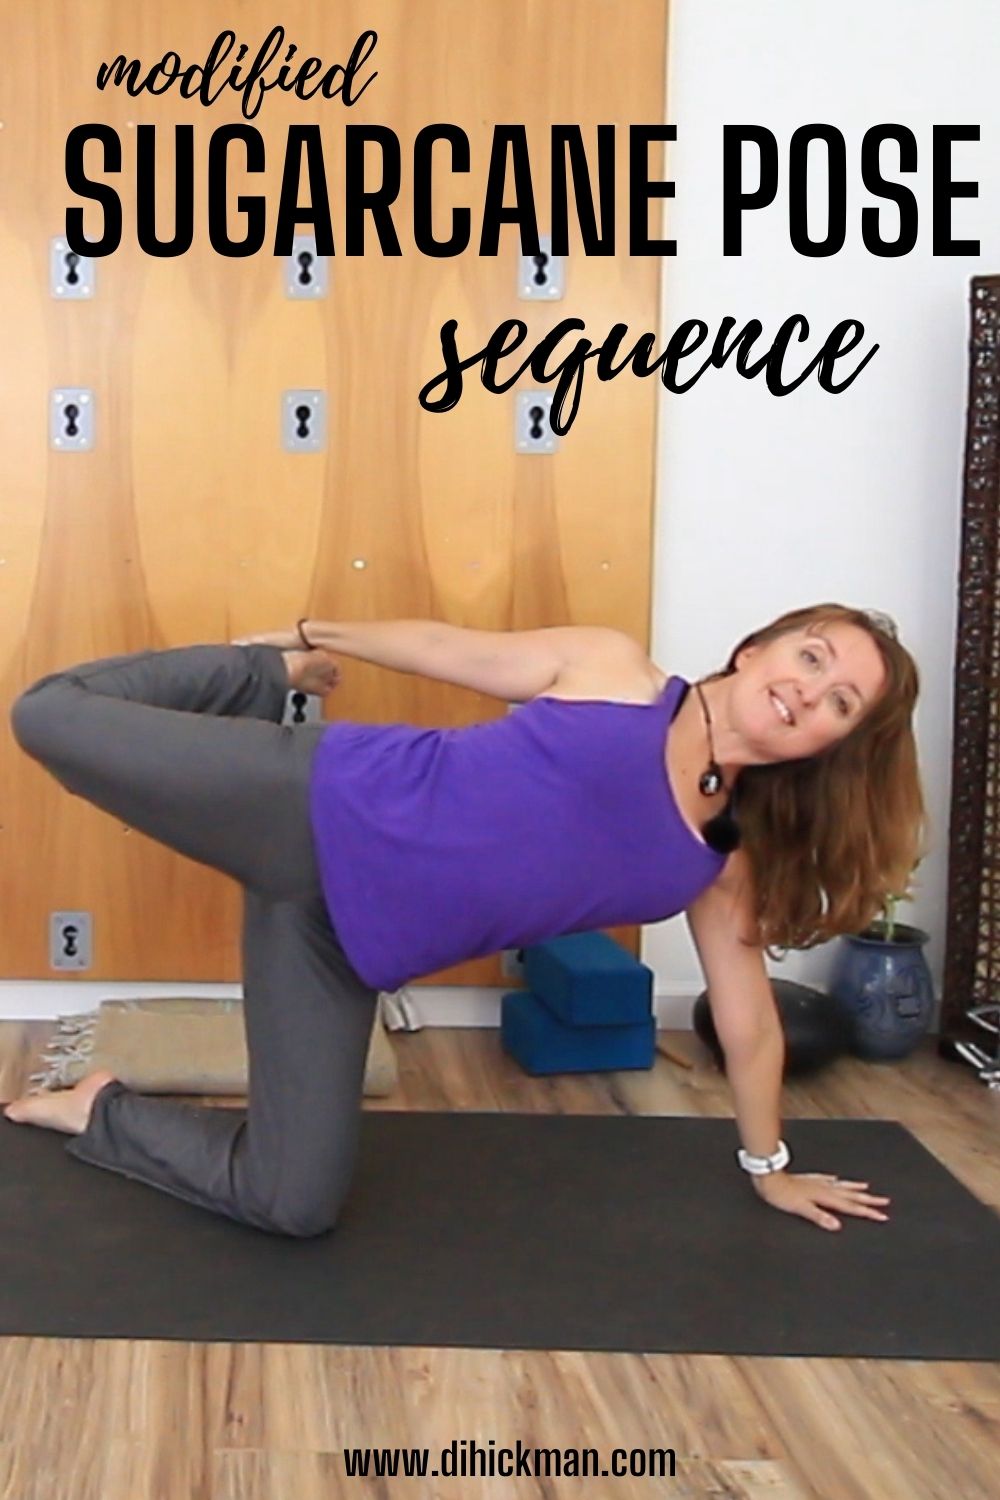 modified sugarcane pose sequence